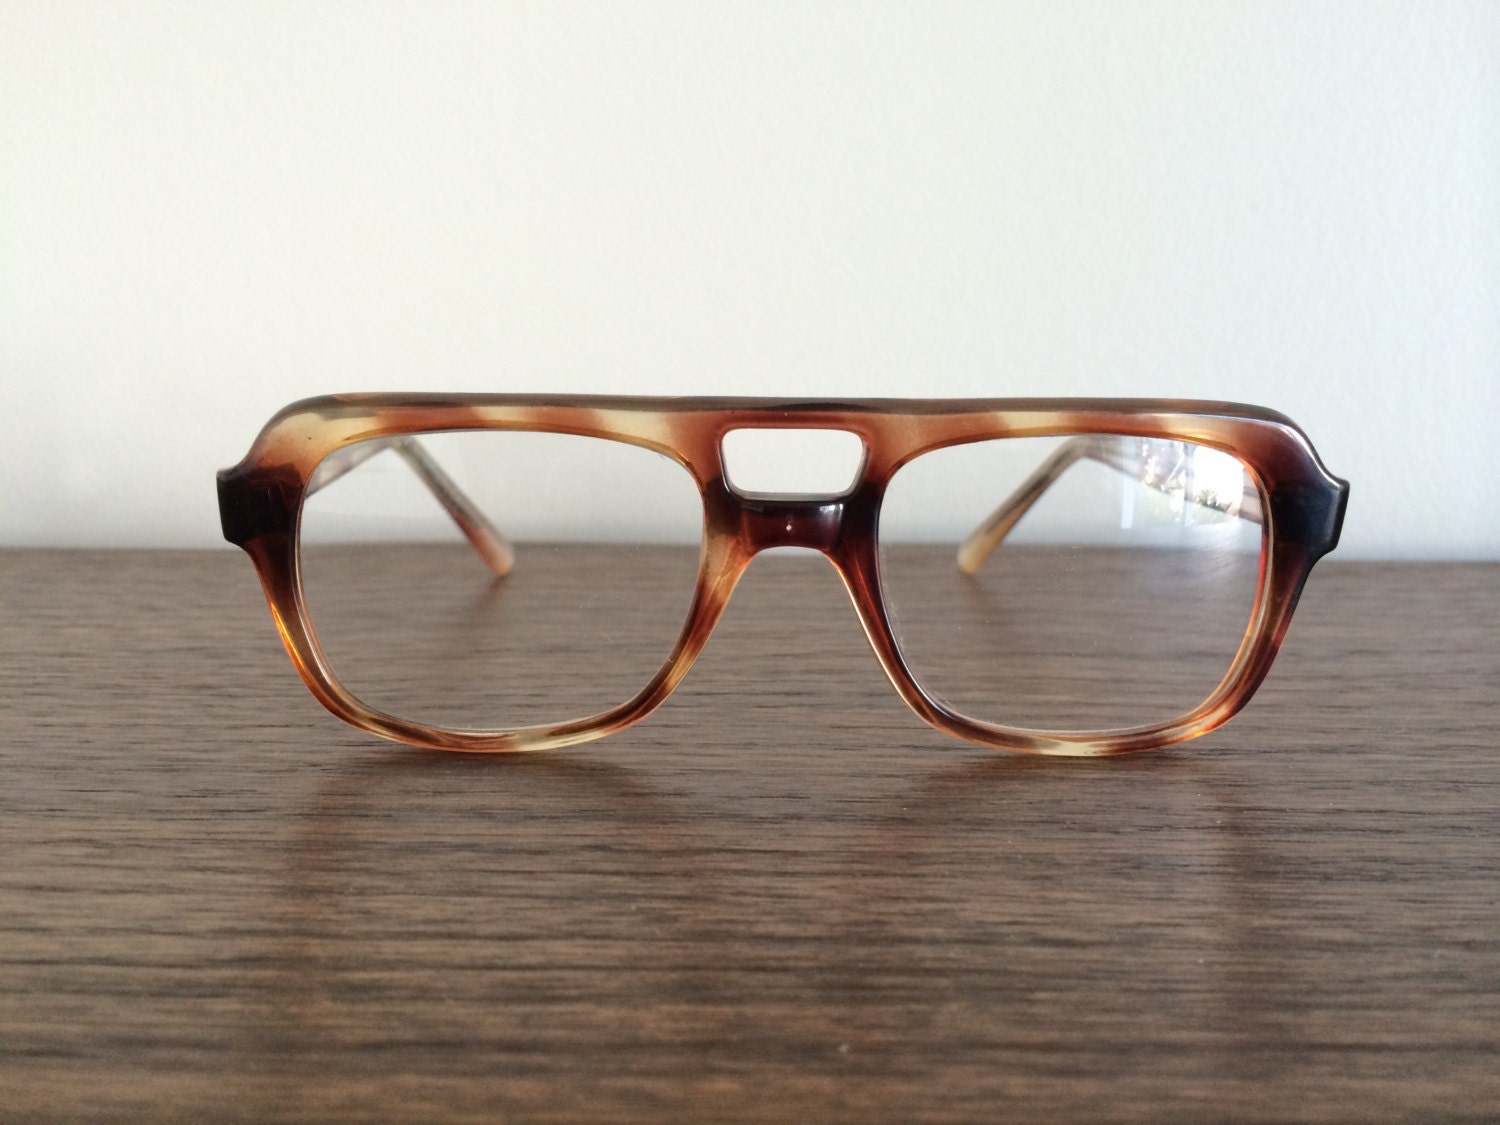 Vintage Brown Tortoise Shell Reading Glasses 2.25 by pastoria